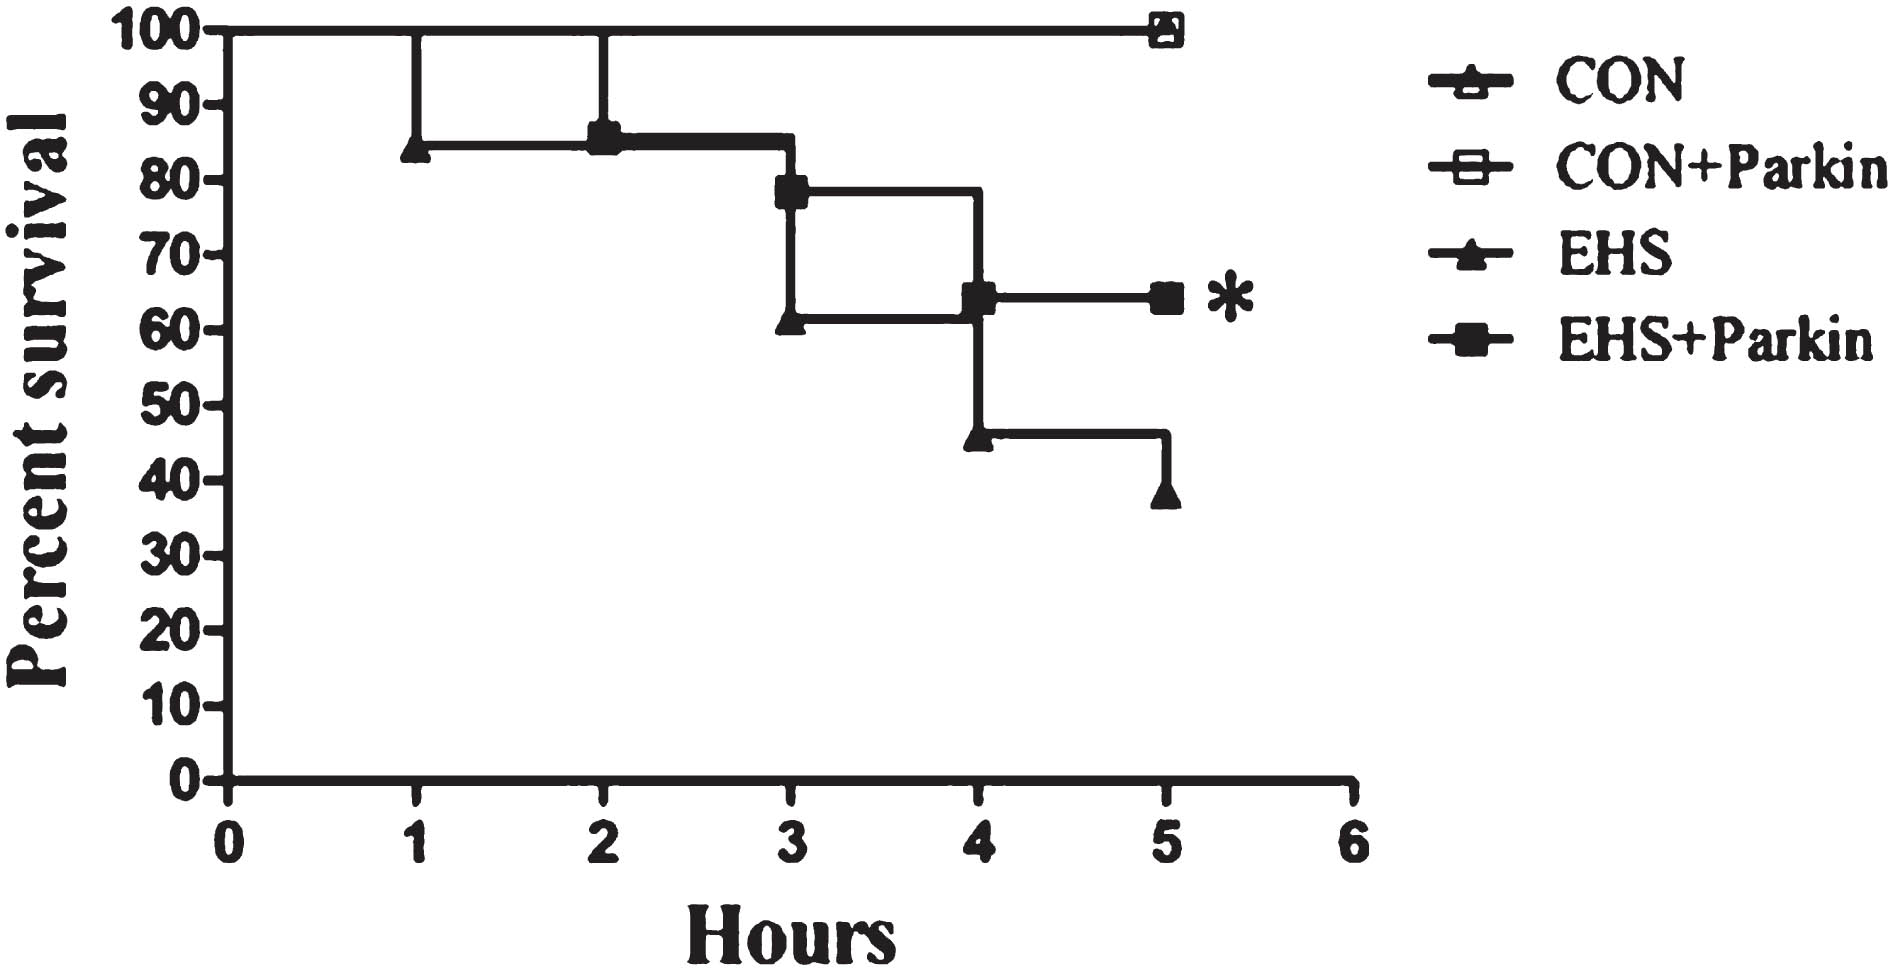 The over-expression of Parkin increases the survival rate of EHS rats (n = 15).